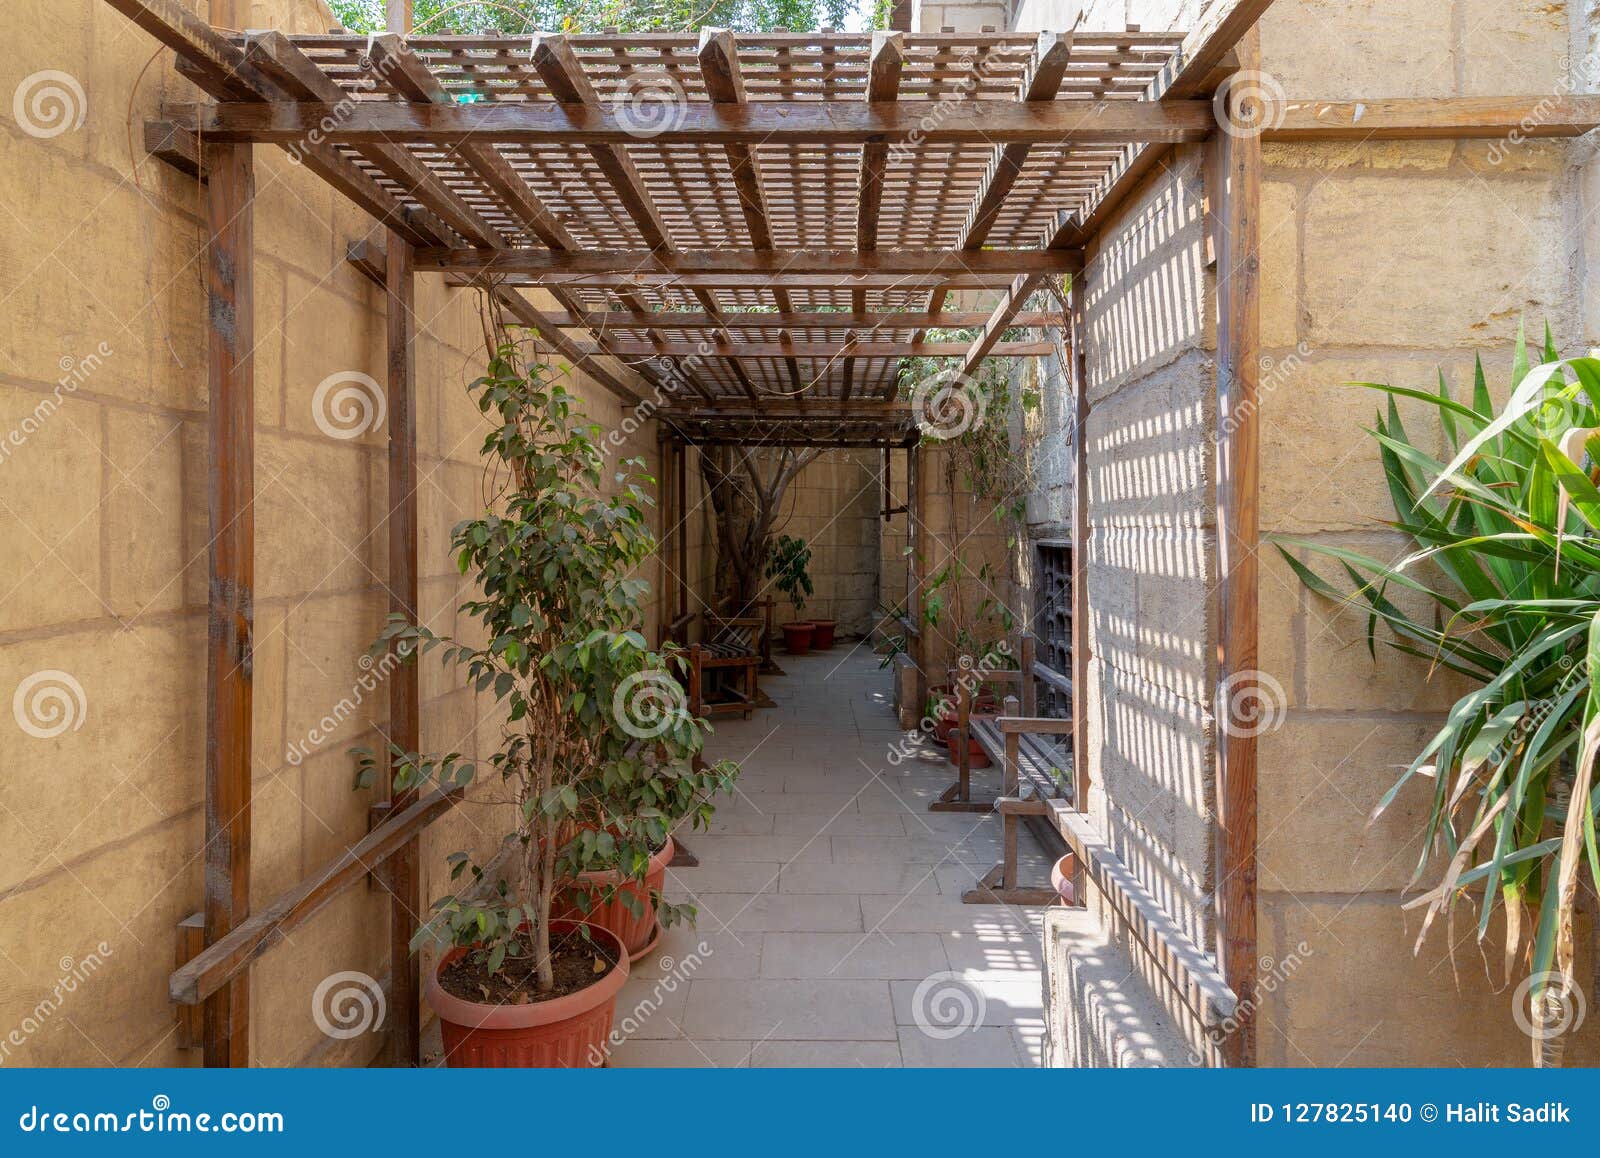 passage ceiled with wooden pergola leading to the historical house of egyptian architecture from the mamluk era, cairo, egypt